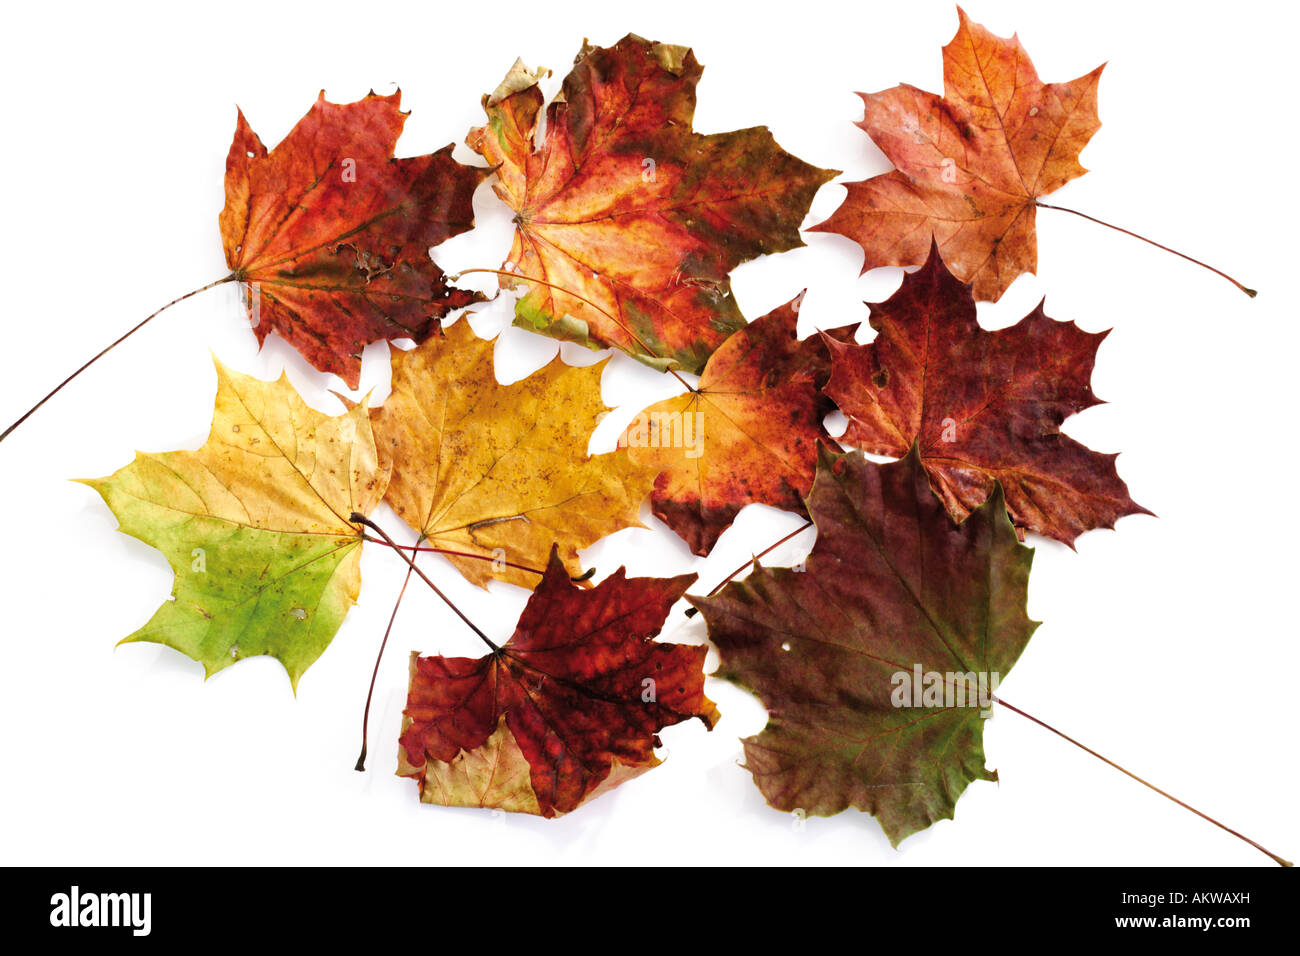 Autumn colored maple leaves, close-up Stock Photo